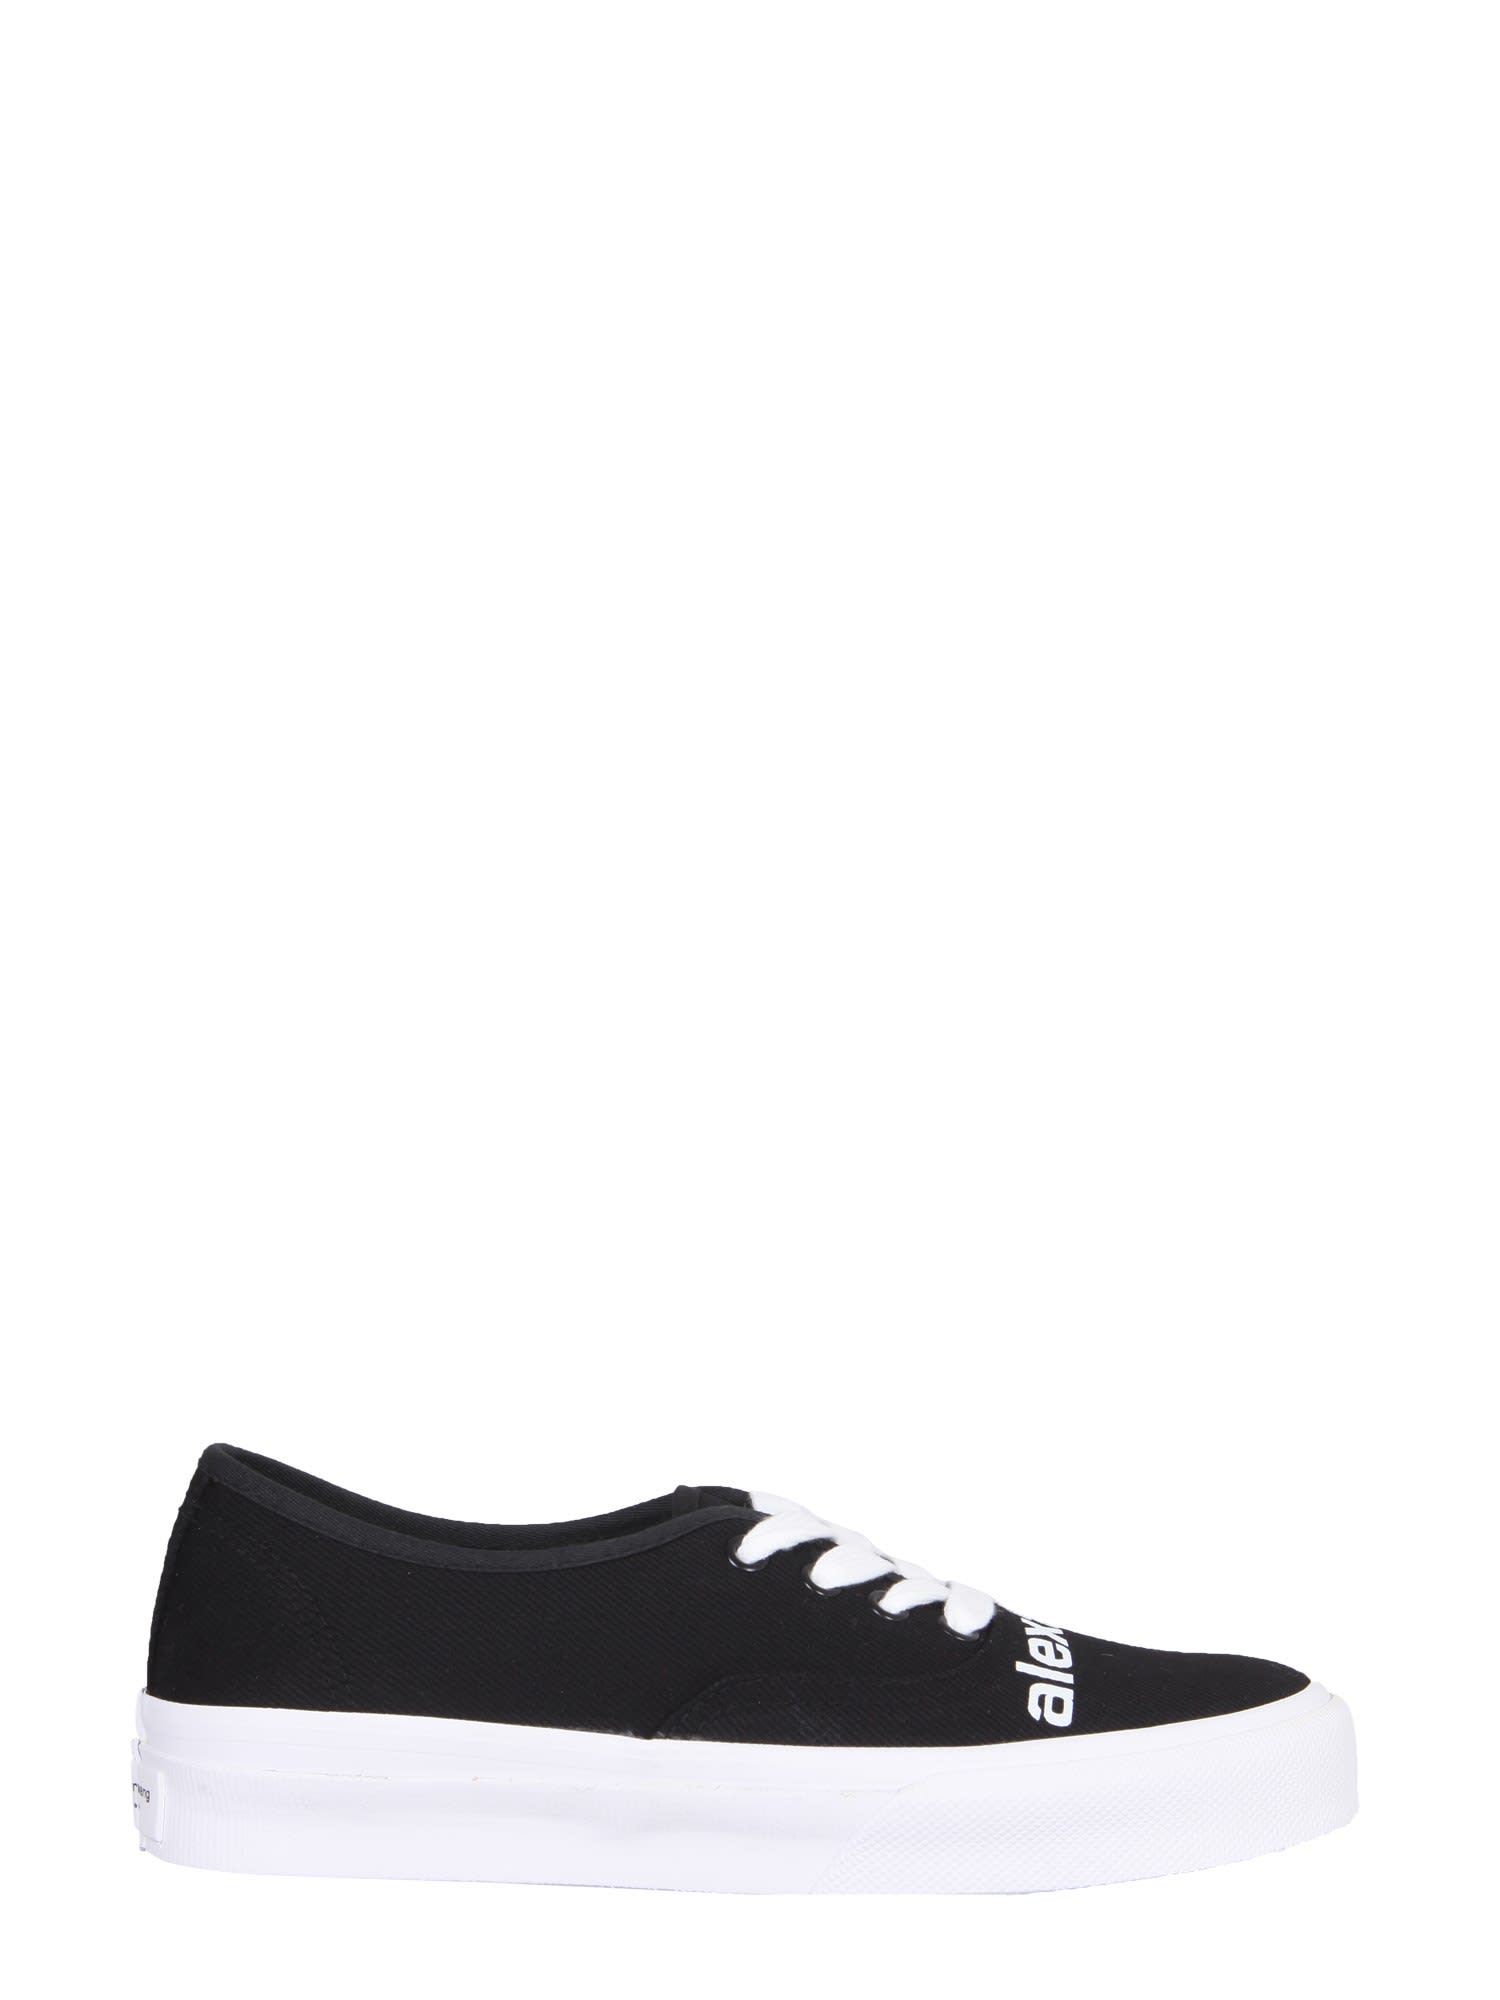 Buy Alexander Wang Drop Out Sneakers online, shop Alexander Wang shoes with free shipping